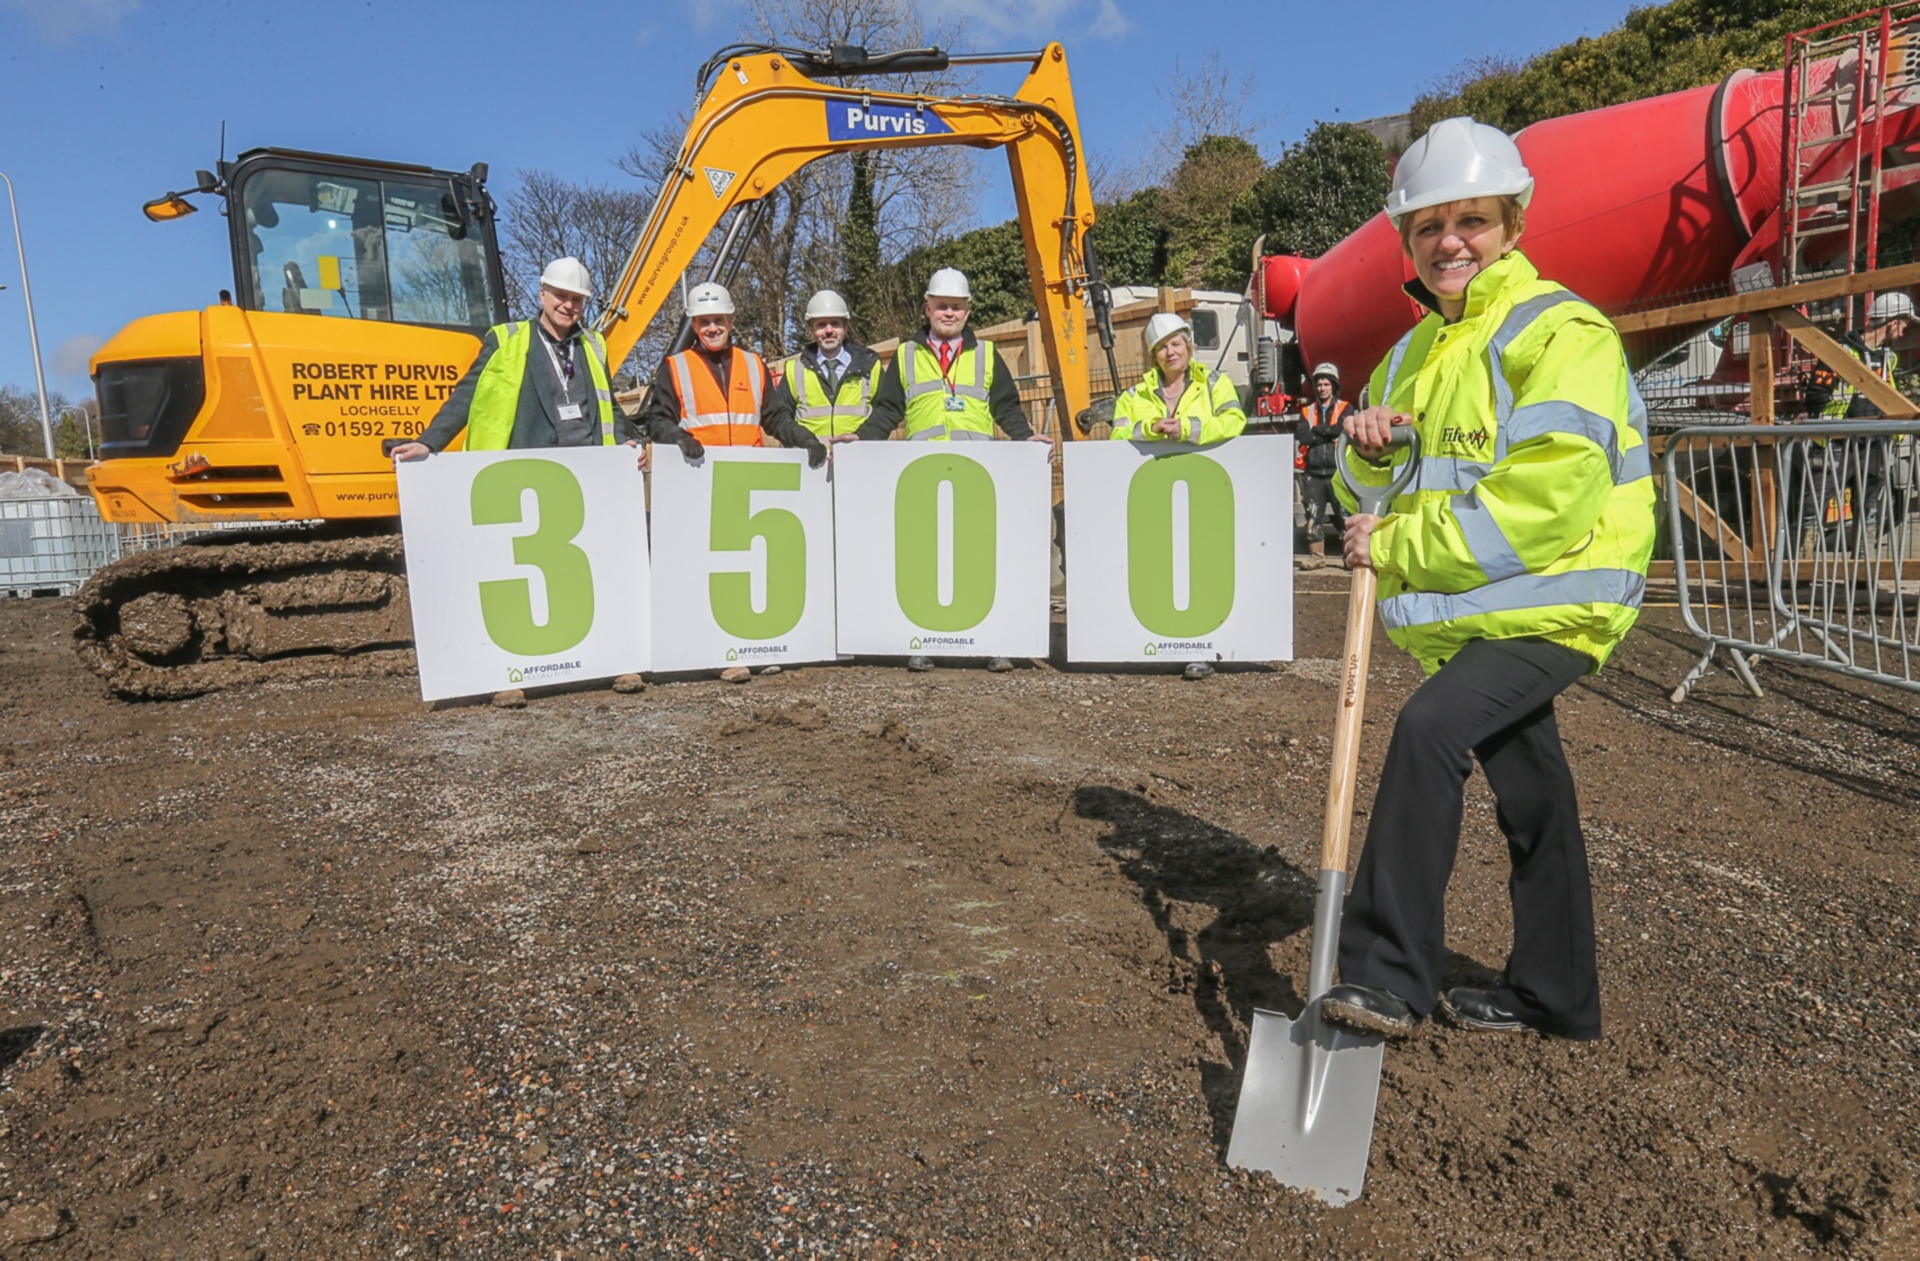 Fife Council’s housing convener Councillor Judy Hamilton at  Bruce Street, Kinghorn, where new homes are being built, as Fife Council approved its programme to build 3,500 affordable homes by 2022